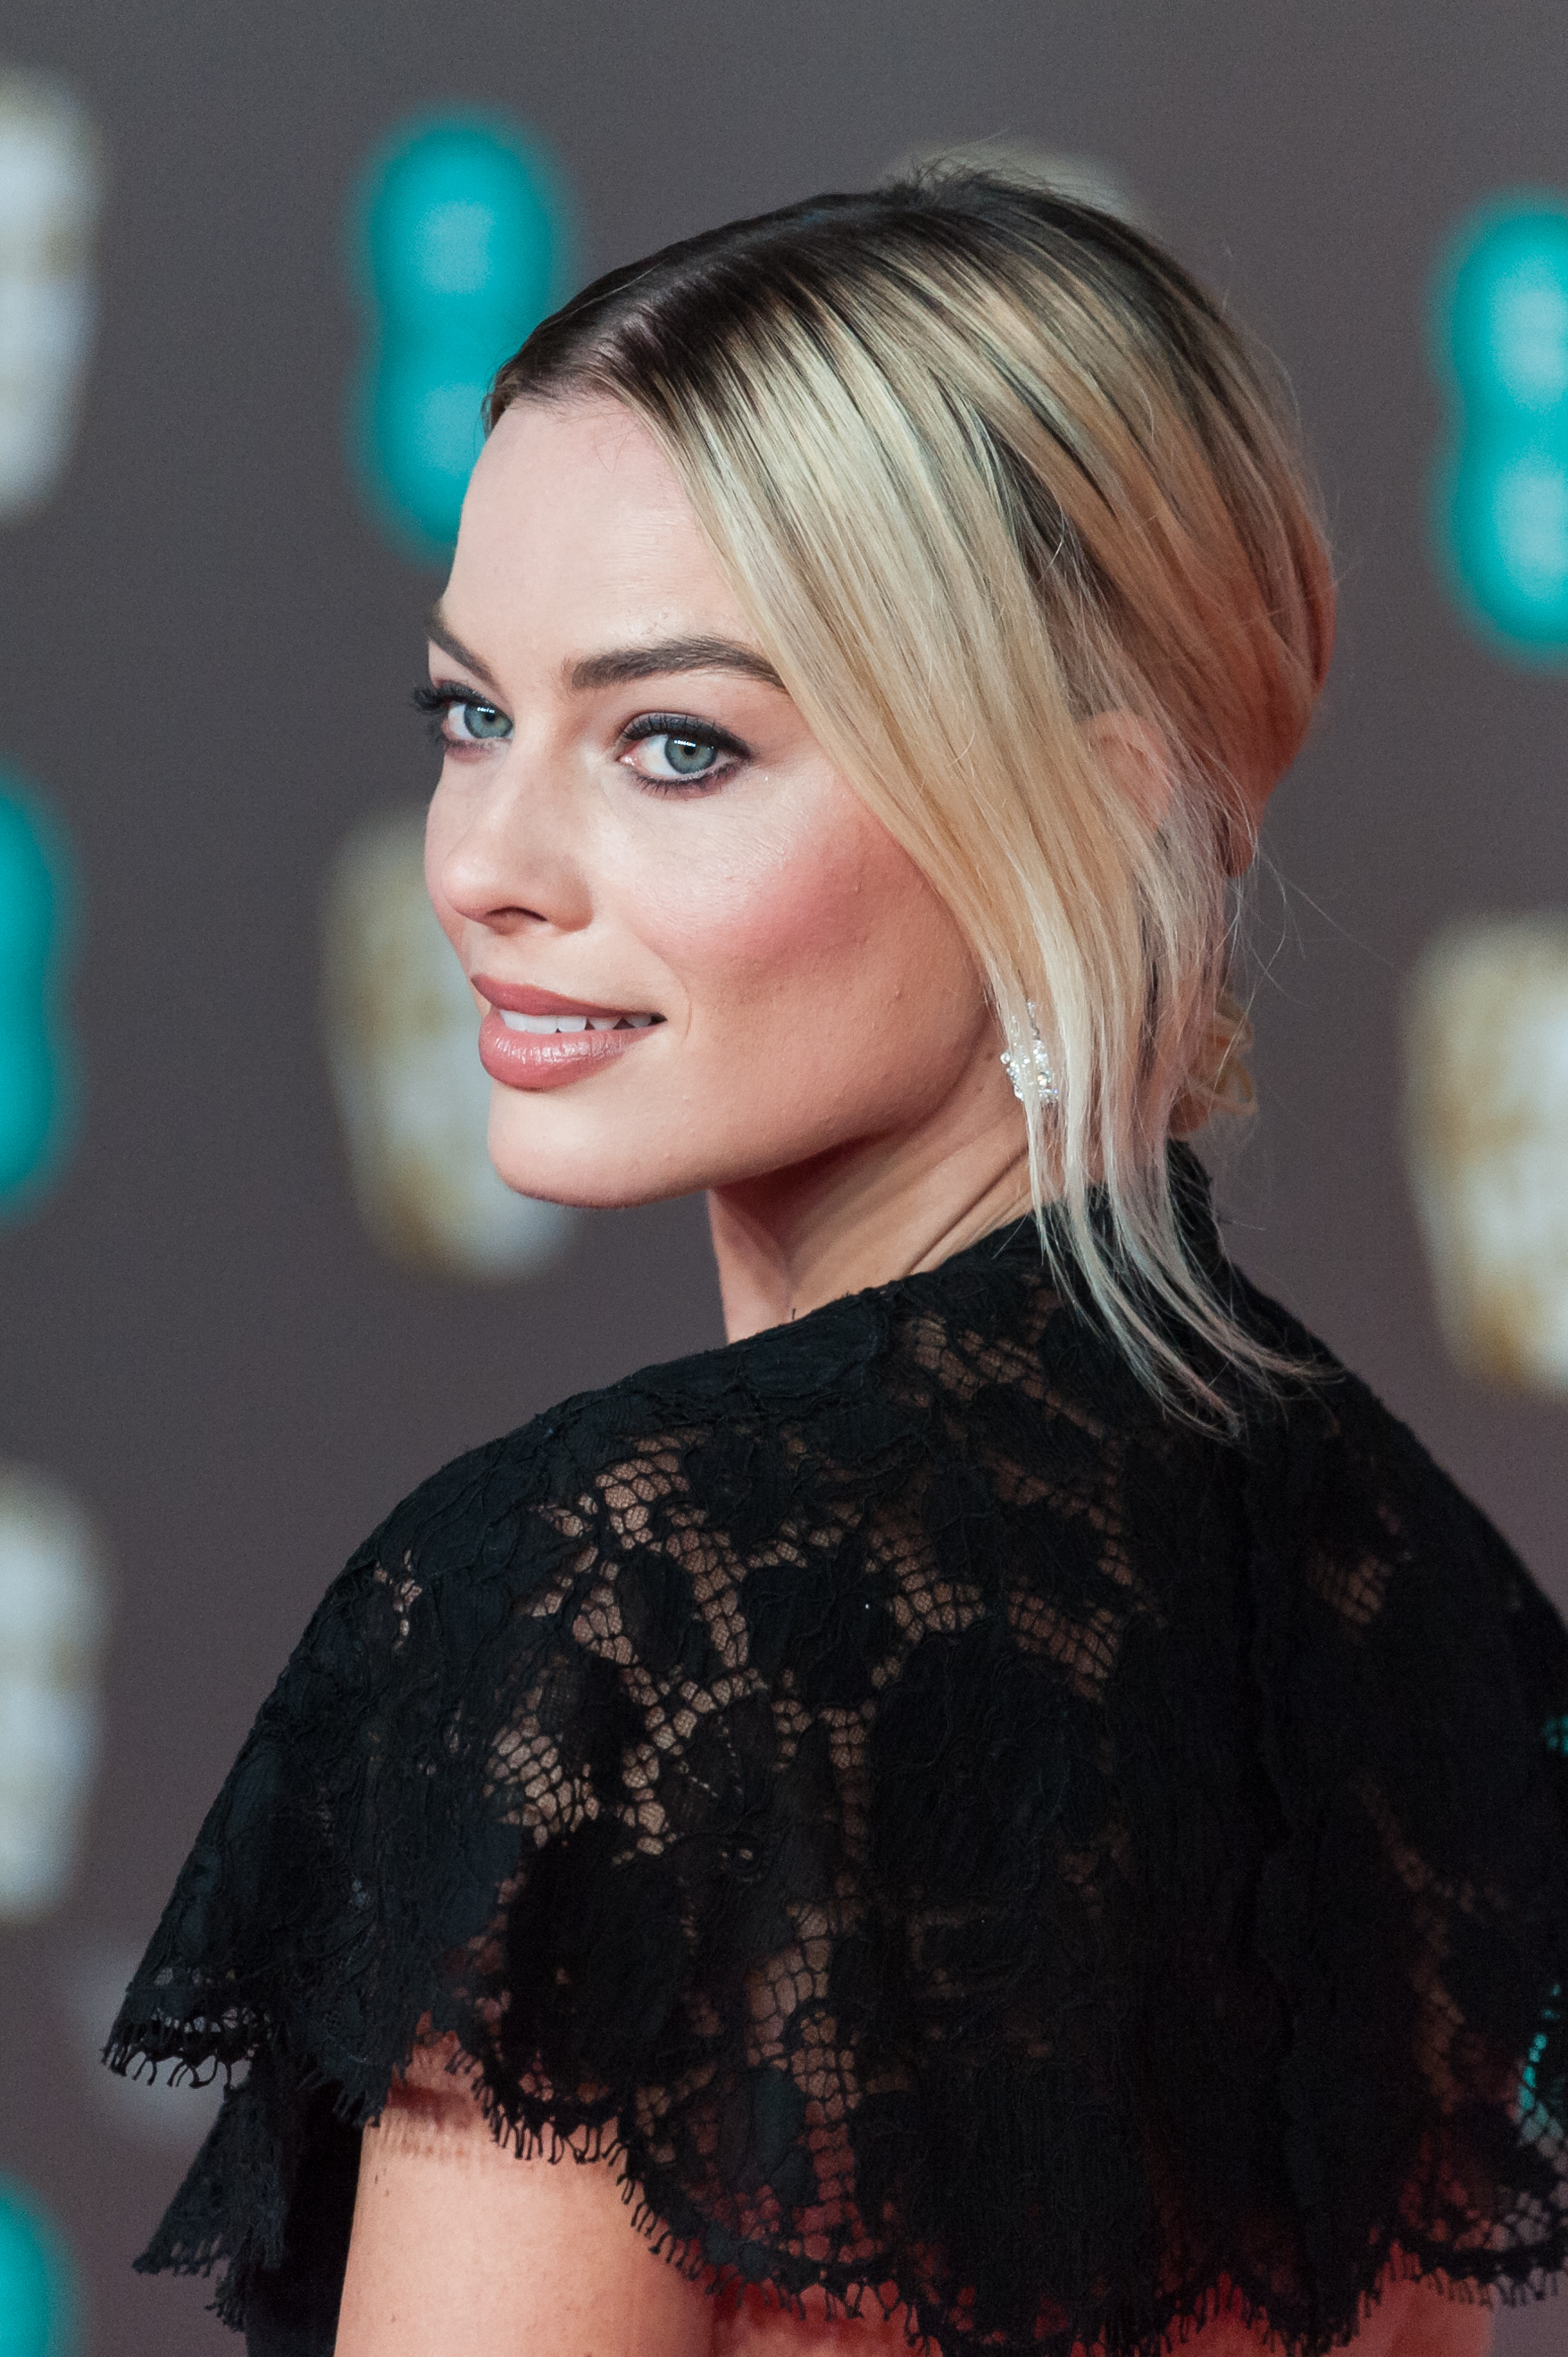 All the Best BAFTAs 2023 Makeup Looks You Need to See